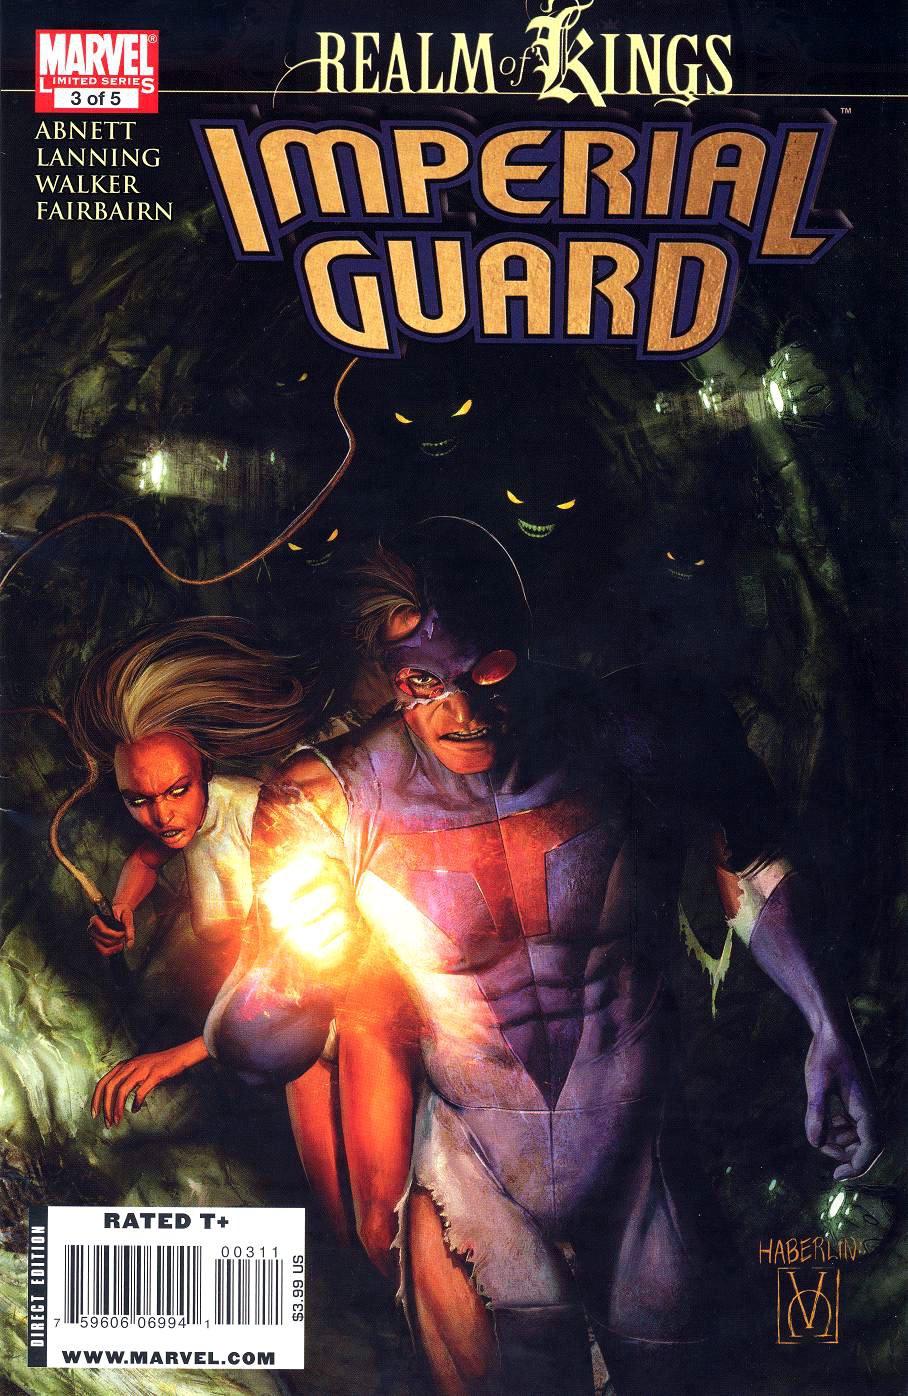 Realm of Kings: Imperial Guard Vol. 1 #3